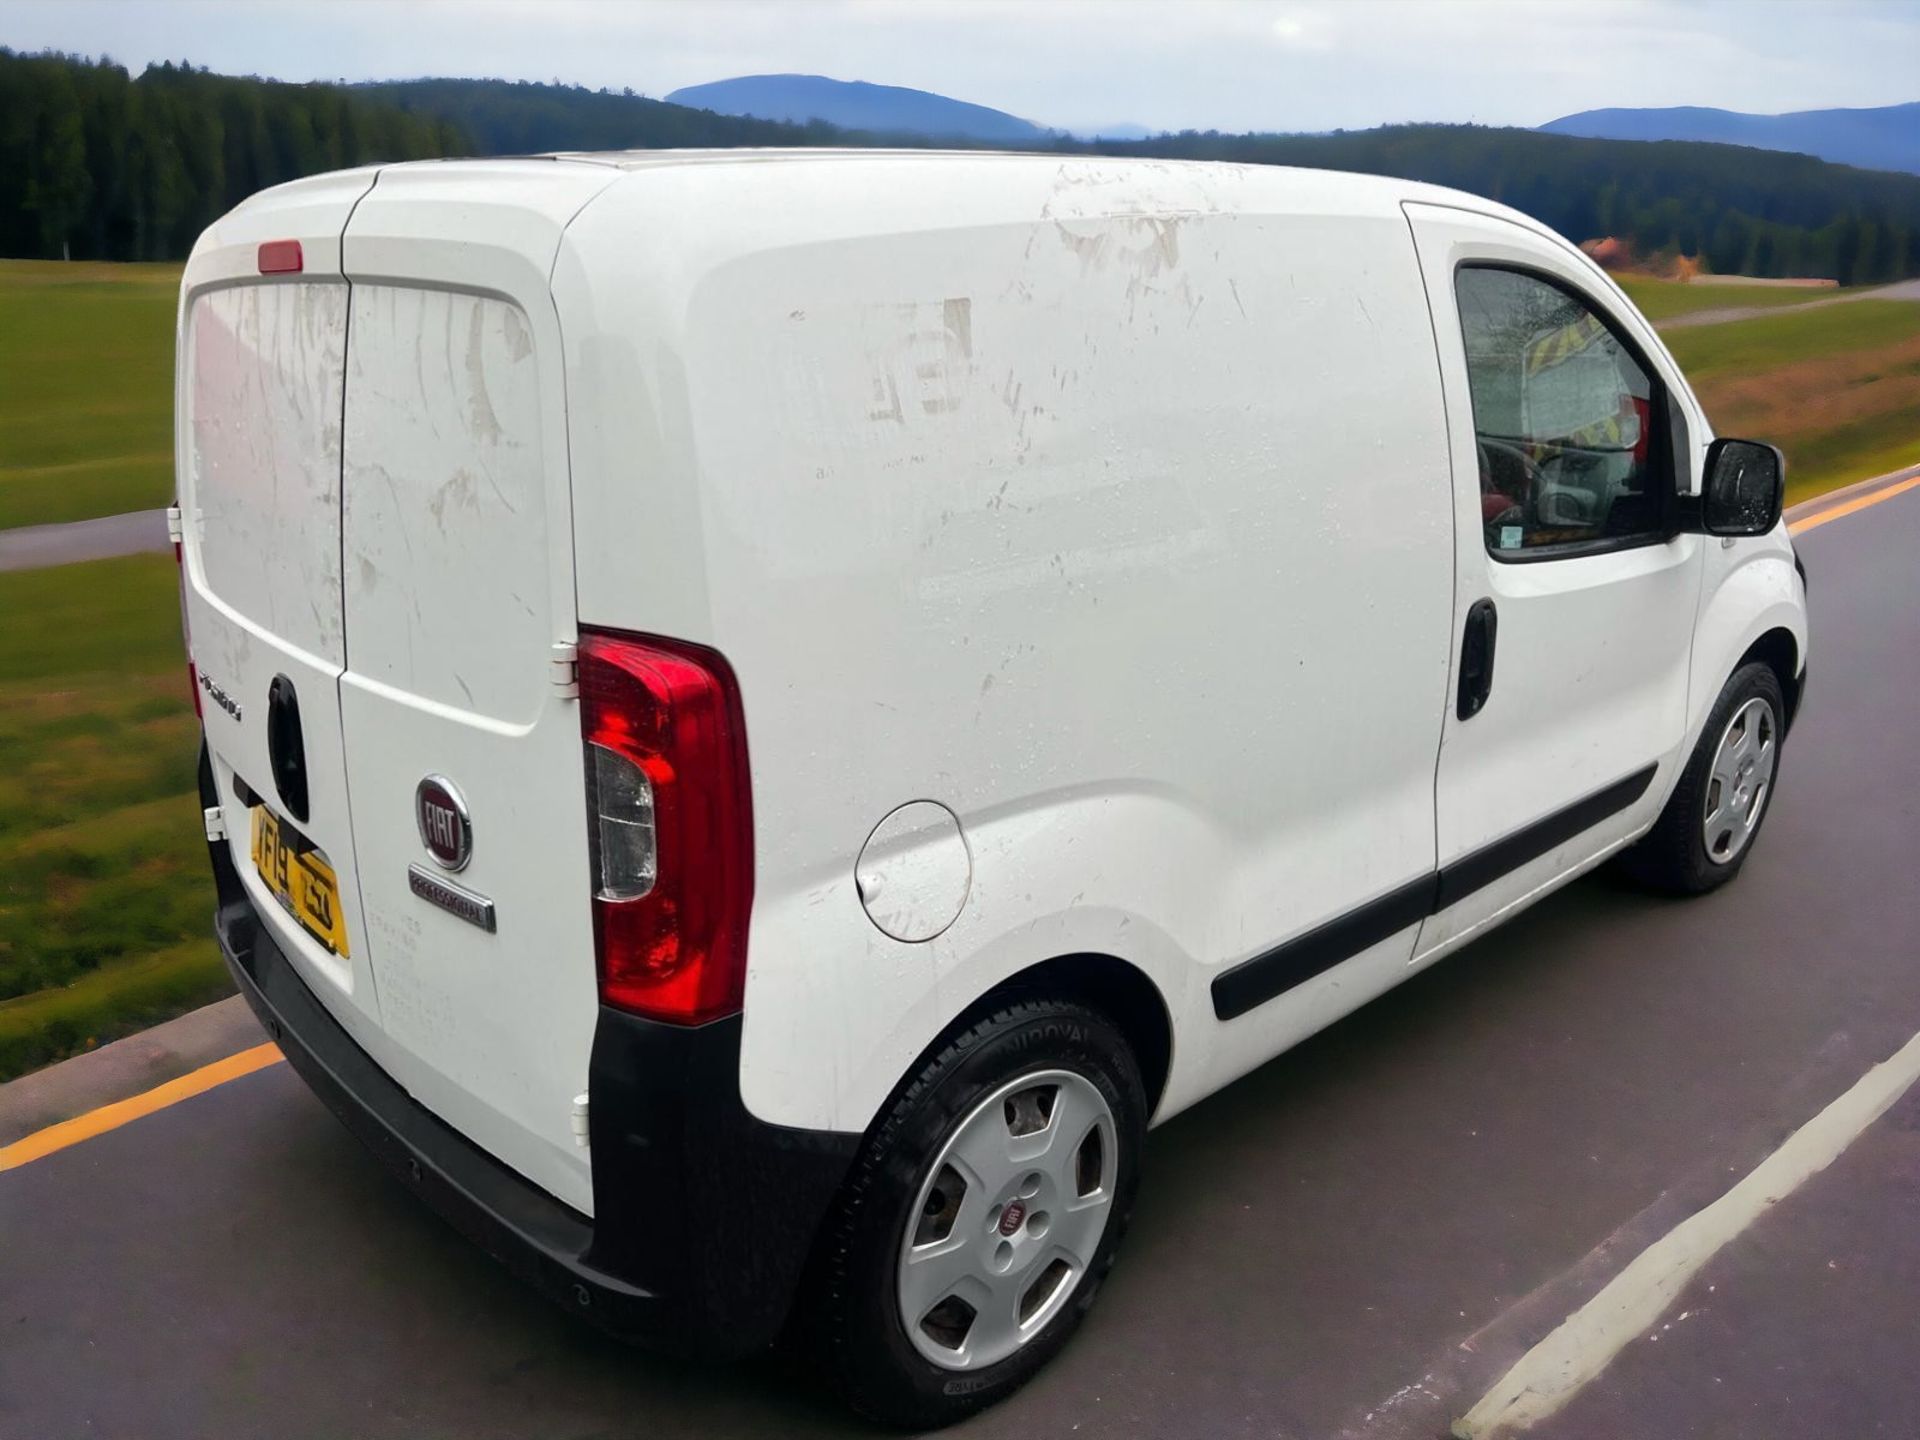 **SPARES OR REAPIRS** 2019 FIAT FIORINO SX 1.3 HDI VAN - YOUR RELIABLE BUSINESS COMPANION - Image 2 of 11